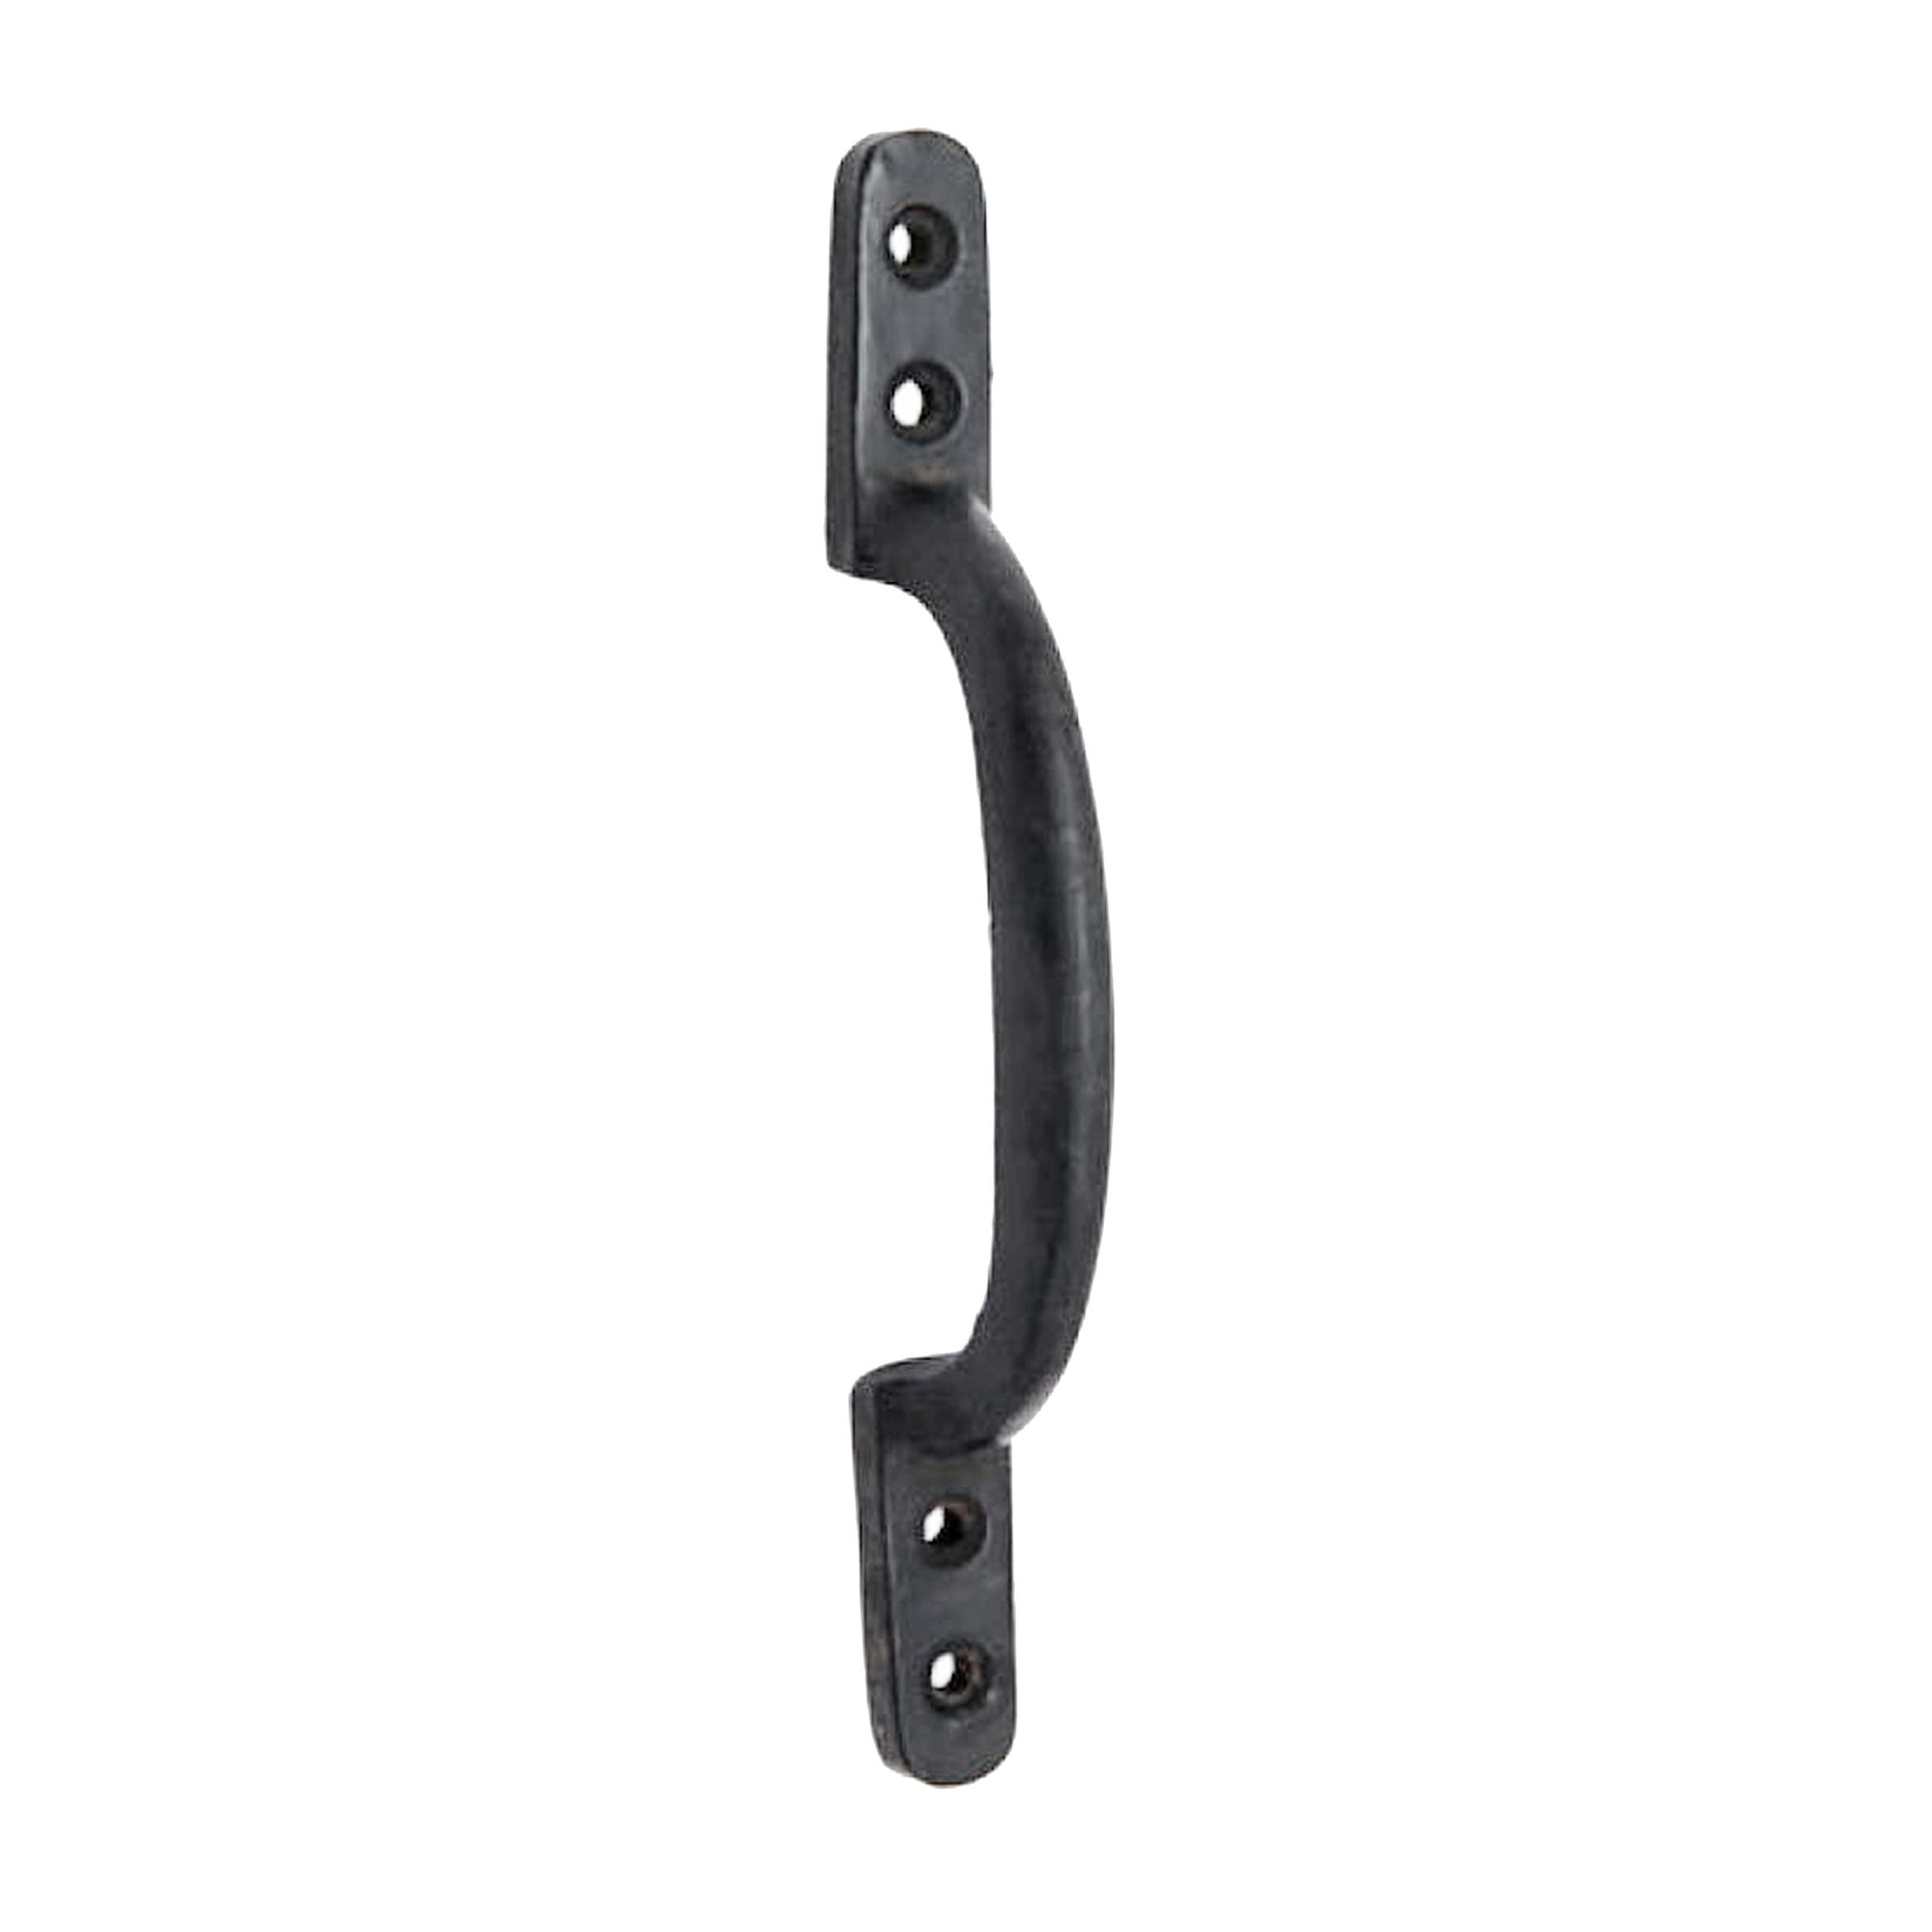 6.1" Black Antique Iron Door and Cabinet Pull - Black Powder Coated